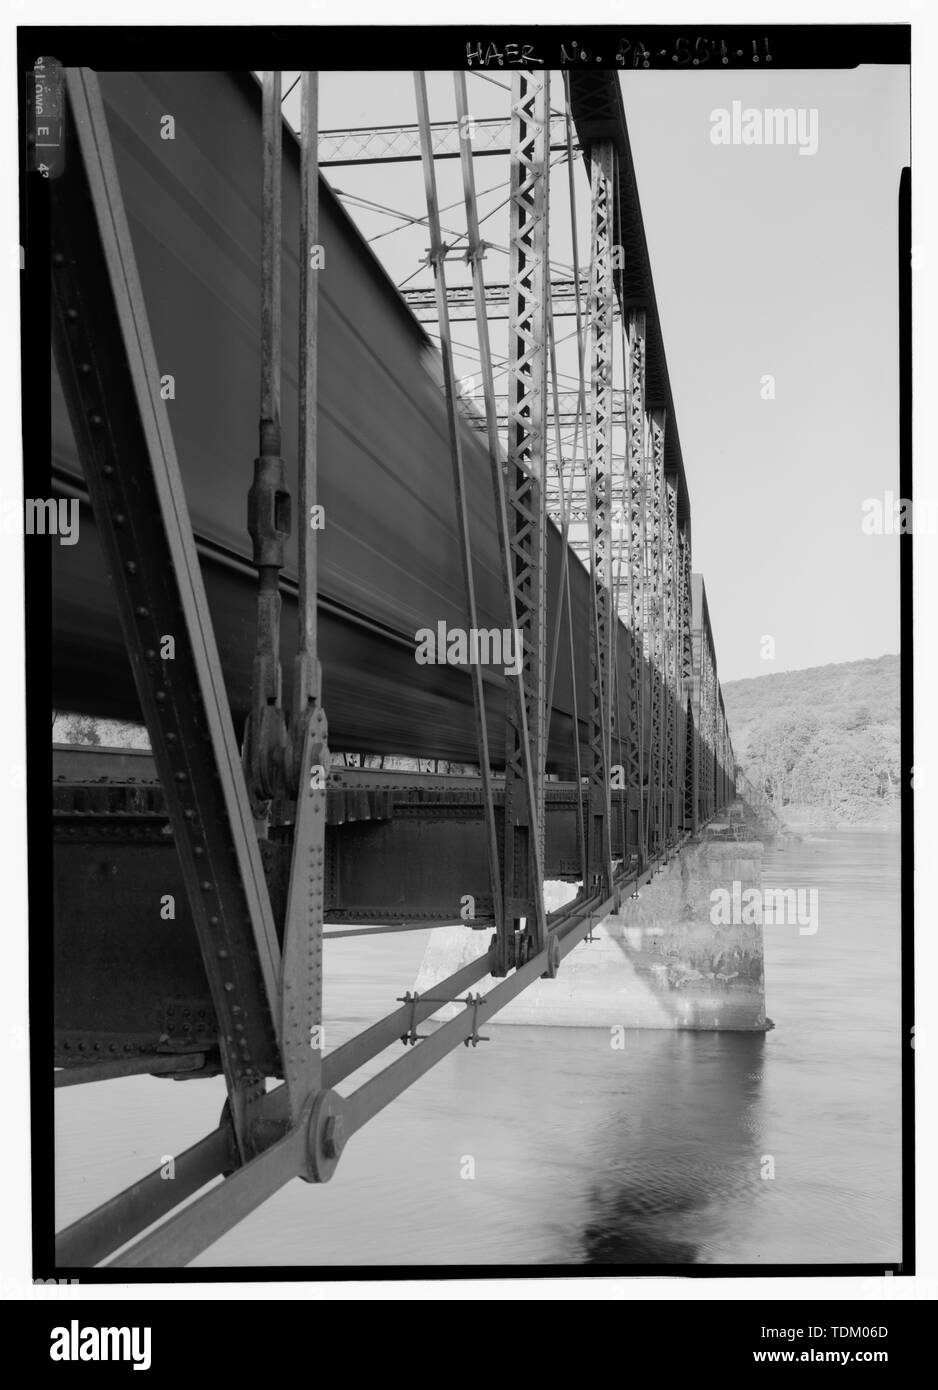 Oblique view of west channel spans, looking east, with train on bridge. - Pennsylvania Railroad, Selinsgrove Bridge, Spanning Susquehanna River, south of Cherry Island, Selinsgrove, Snyder County, PA; Brown, William H; A. and P. Roberts; Pencoyd Bridge and Construction Company; Cofrode and Saylor, Engineers and Bridge Builders; Pennsylvania Railroad; Consolidated Rail Corporation (Conrail); Norfolk Southern Railroad; Sunbury and Lewistown Railroad; Schuylkill and Juniata Railroad; Susquehanna College; DeLony, Eric N, project manager; Pennsylvania Historical and Museum Commission, sponsor; Cons Stock Photo